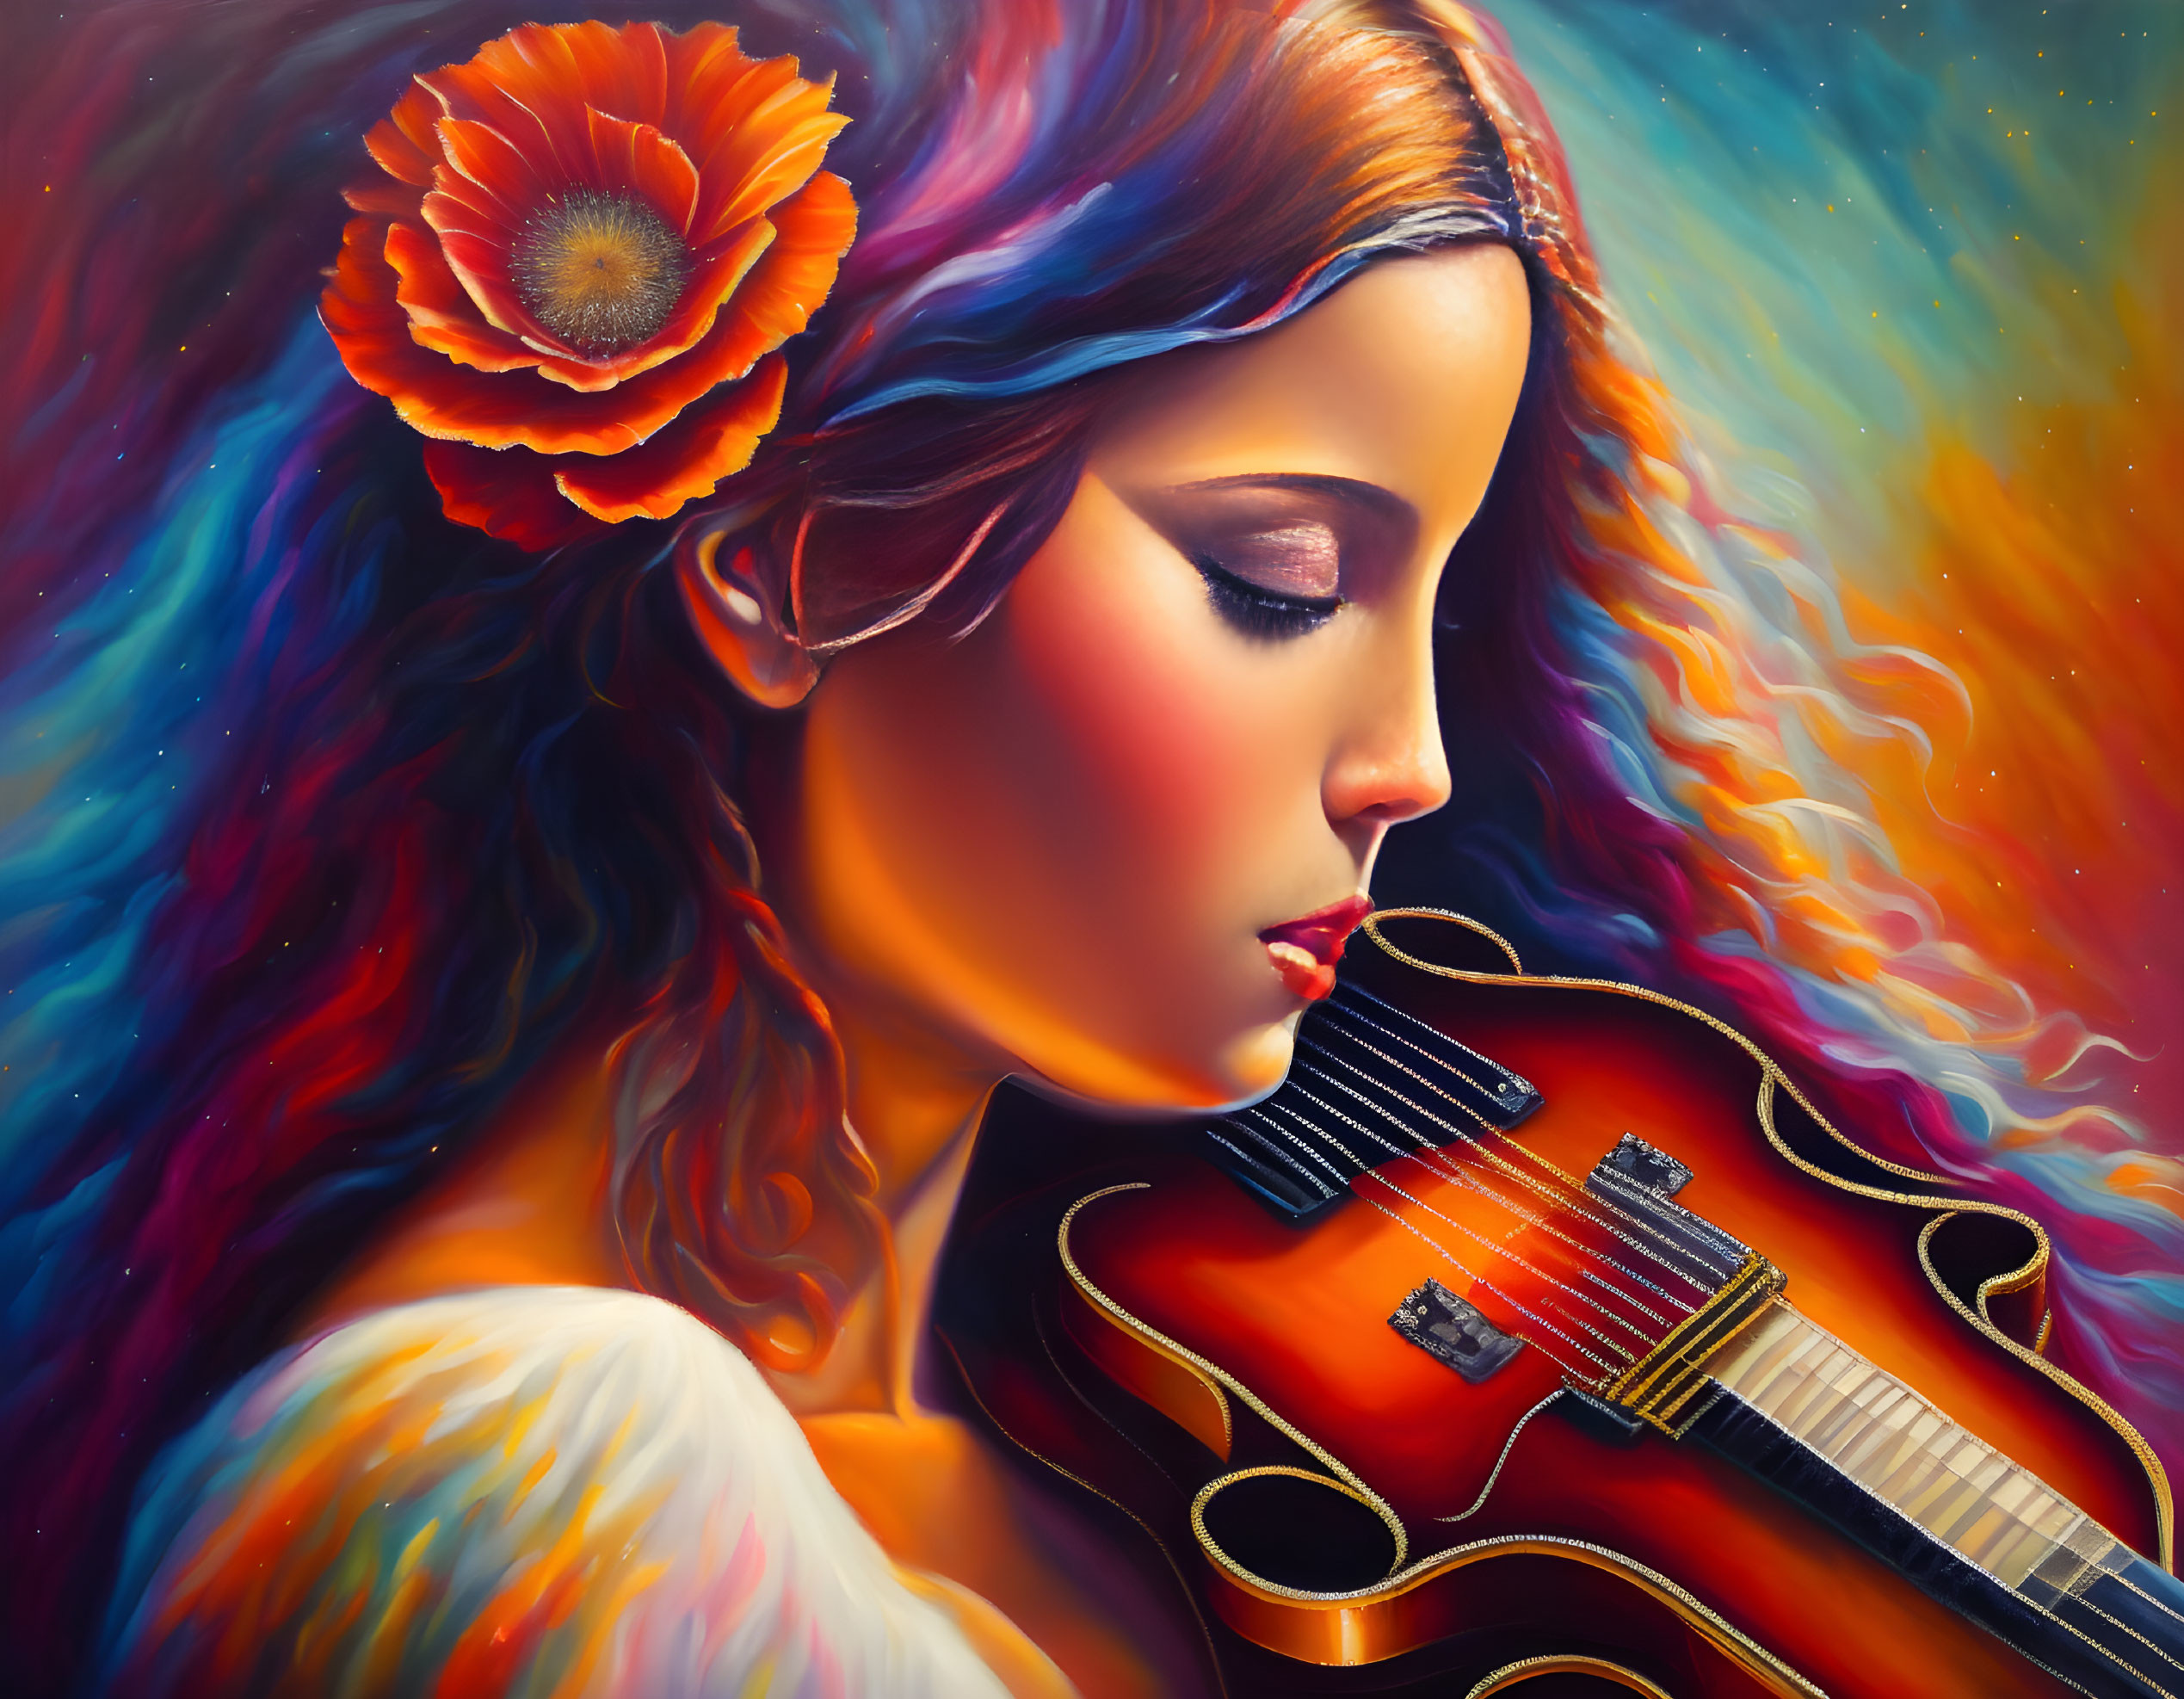 Colorful painting of woman with flowing hair holding a violin and flower.